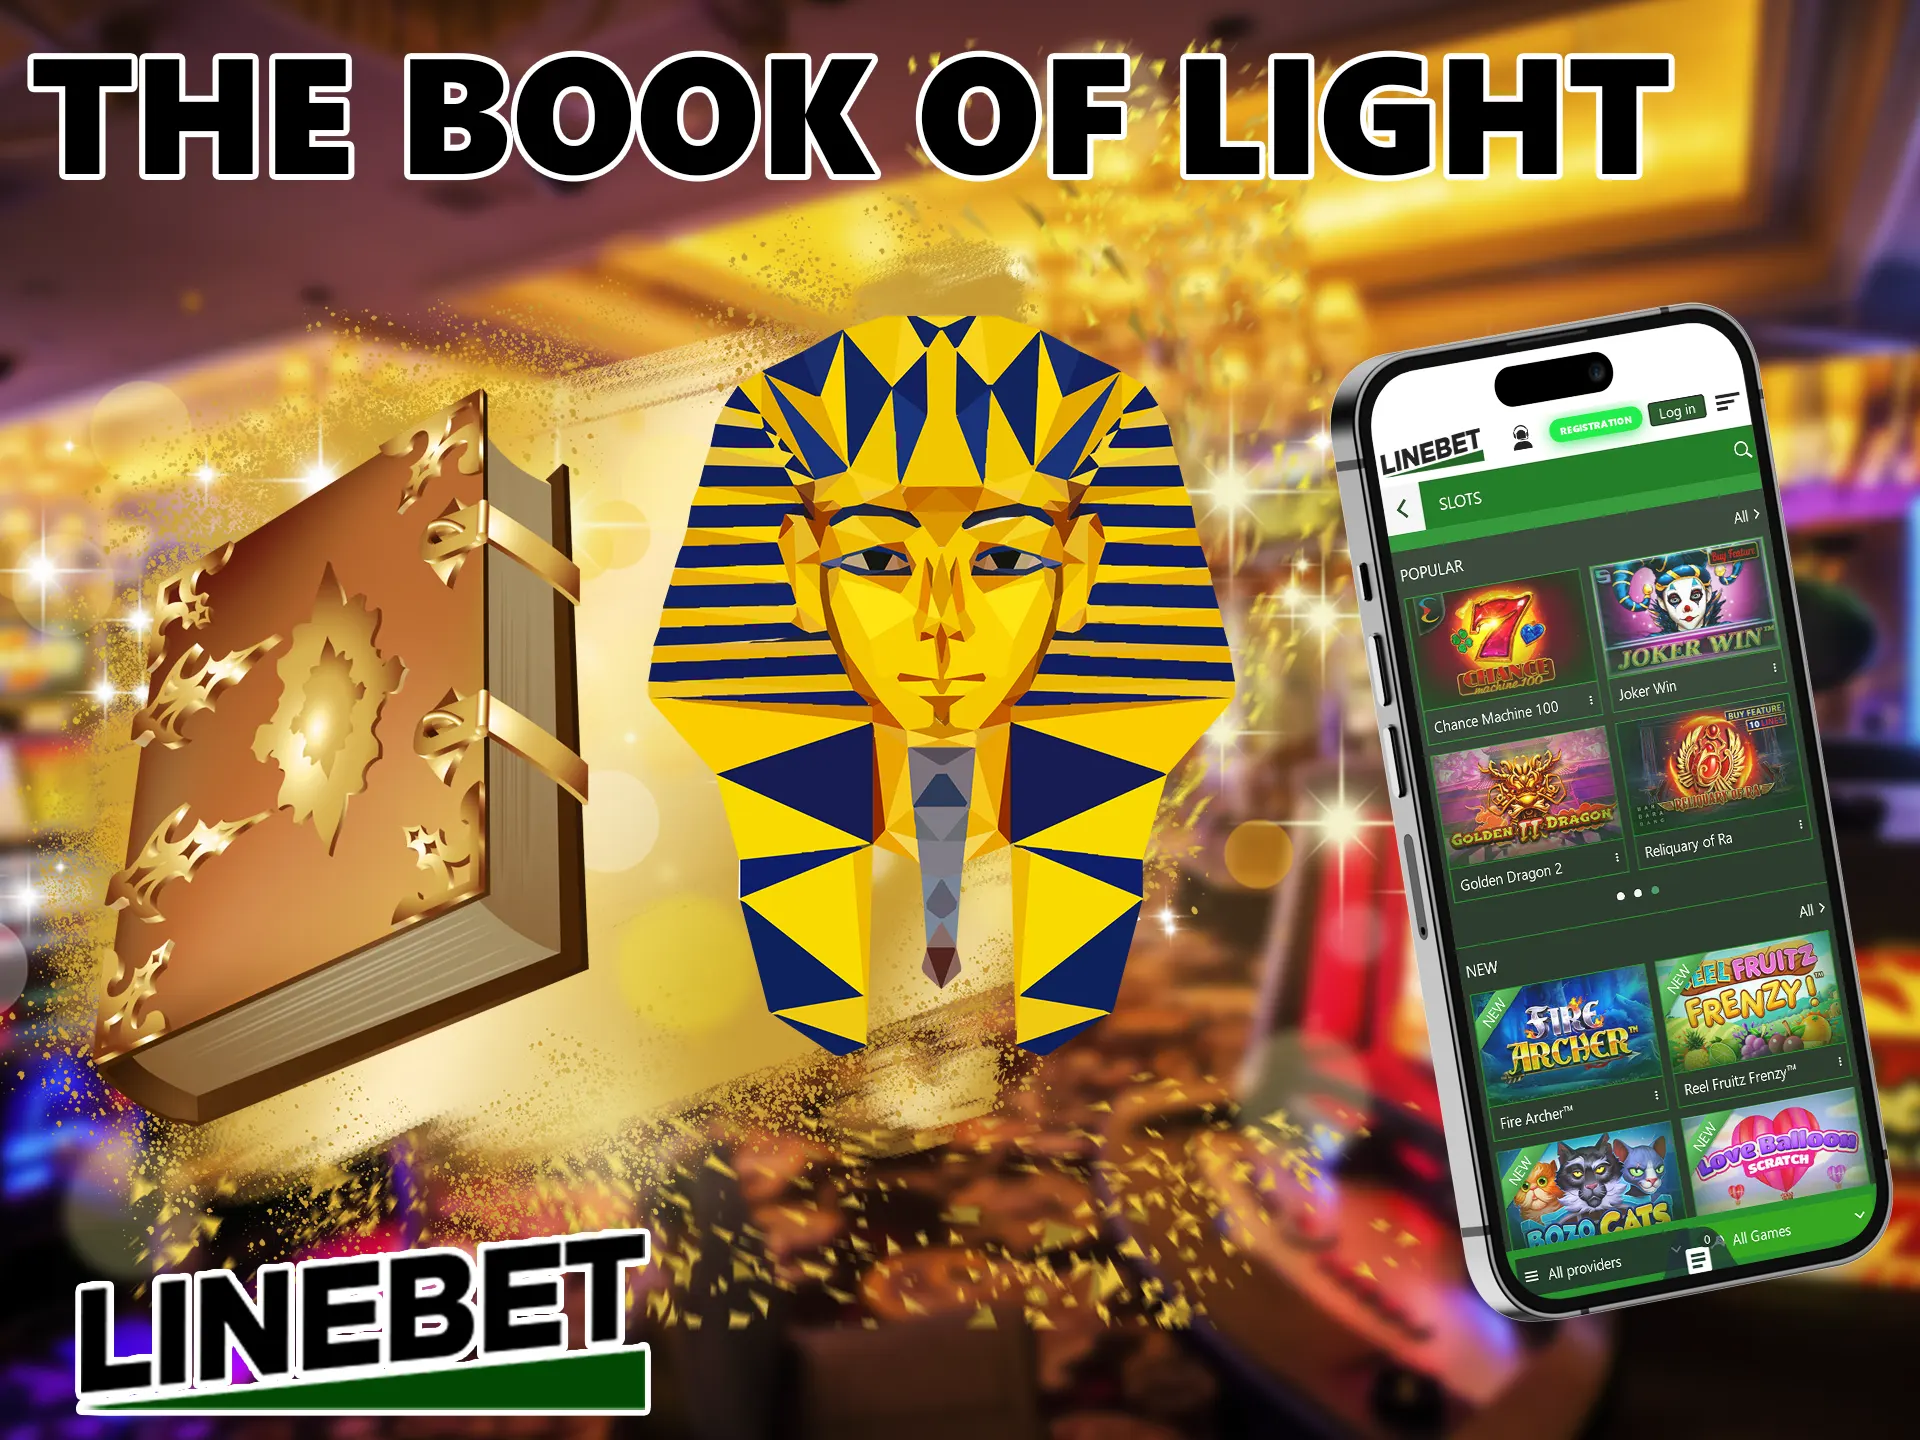 It's a fairly young game, immersed in the atmosphere of Ancient Egypt, available on Linebet with 5 reels and a 5x5 layout.